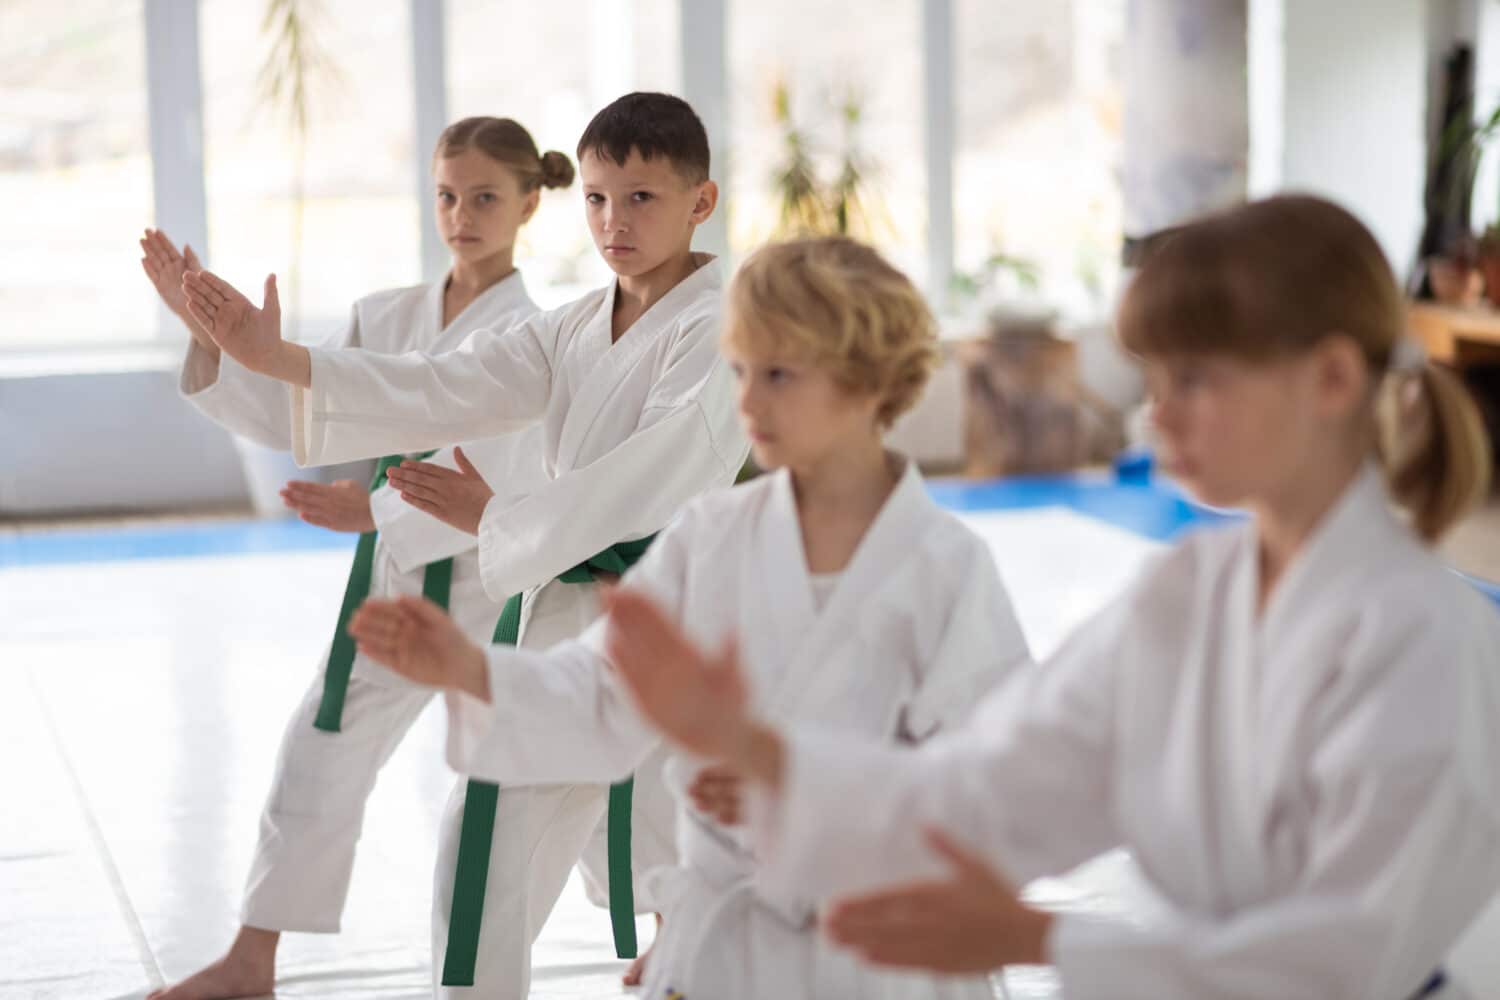 Kids practicing forms in a children's martial arts class